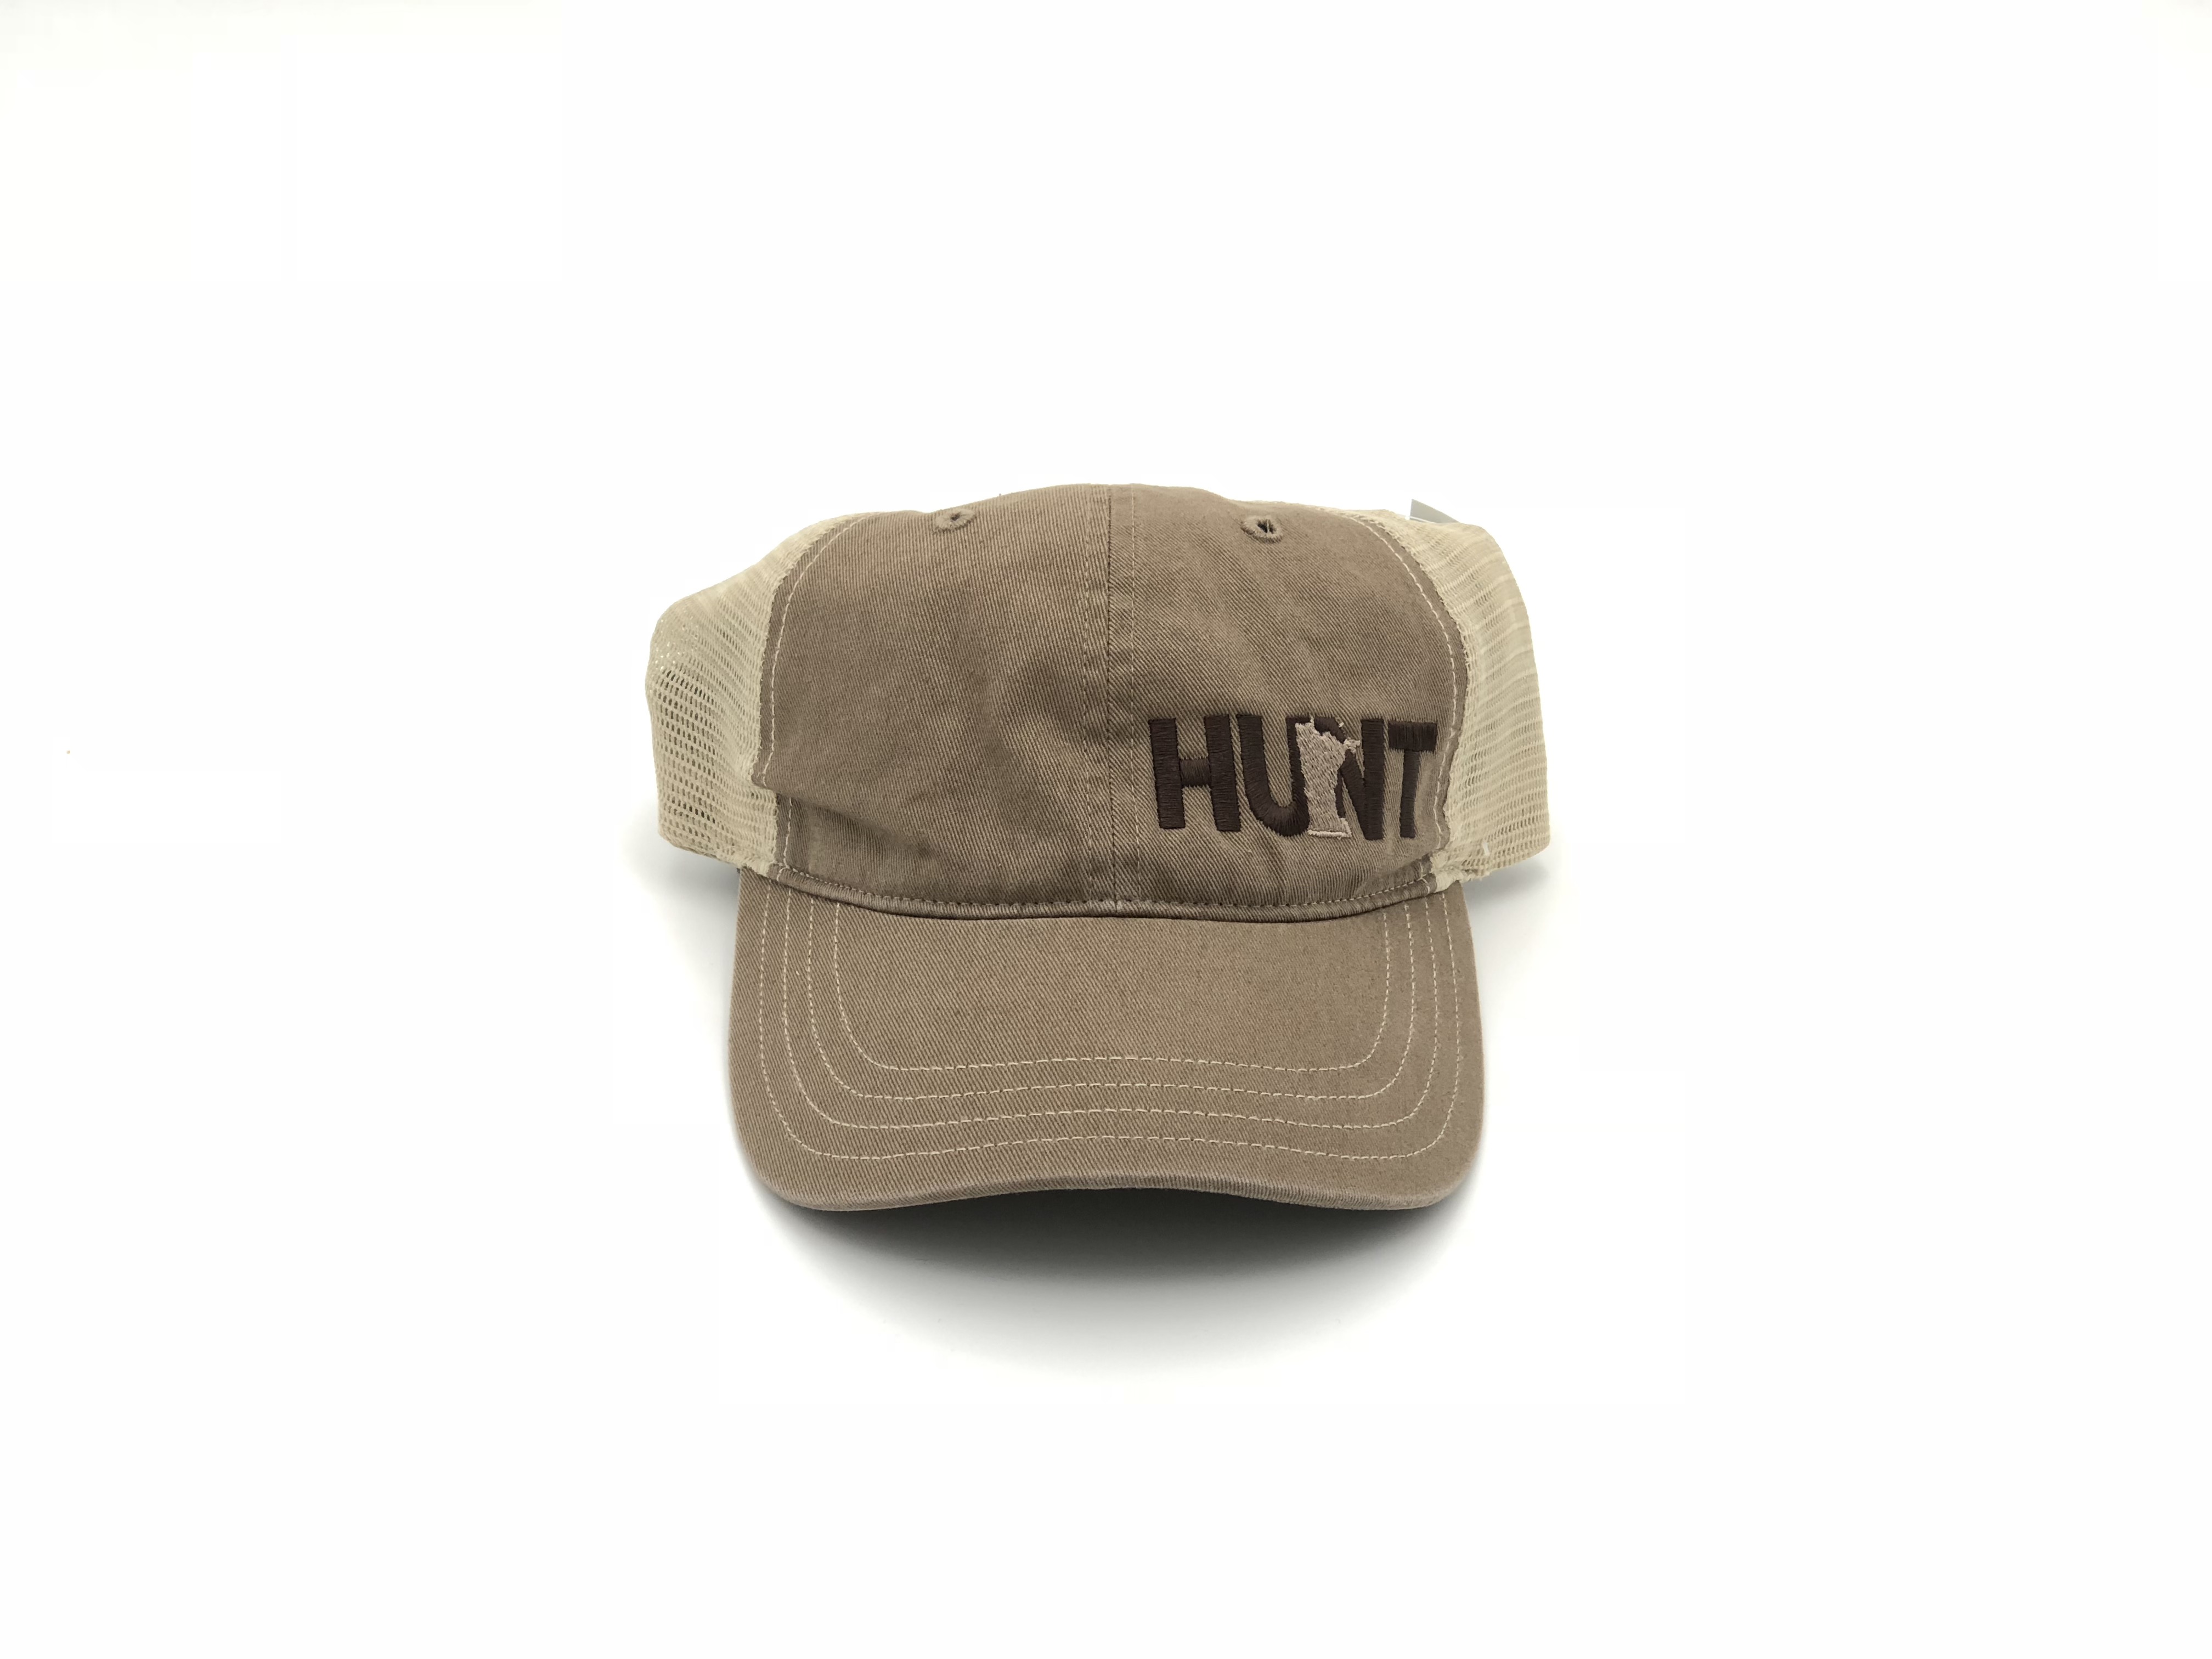 Hunt Minnesota Night Out Embroidered Unstructured Snapback Dad Hat Driftwood/Khaki